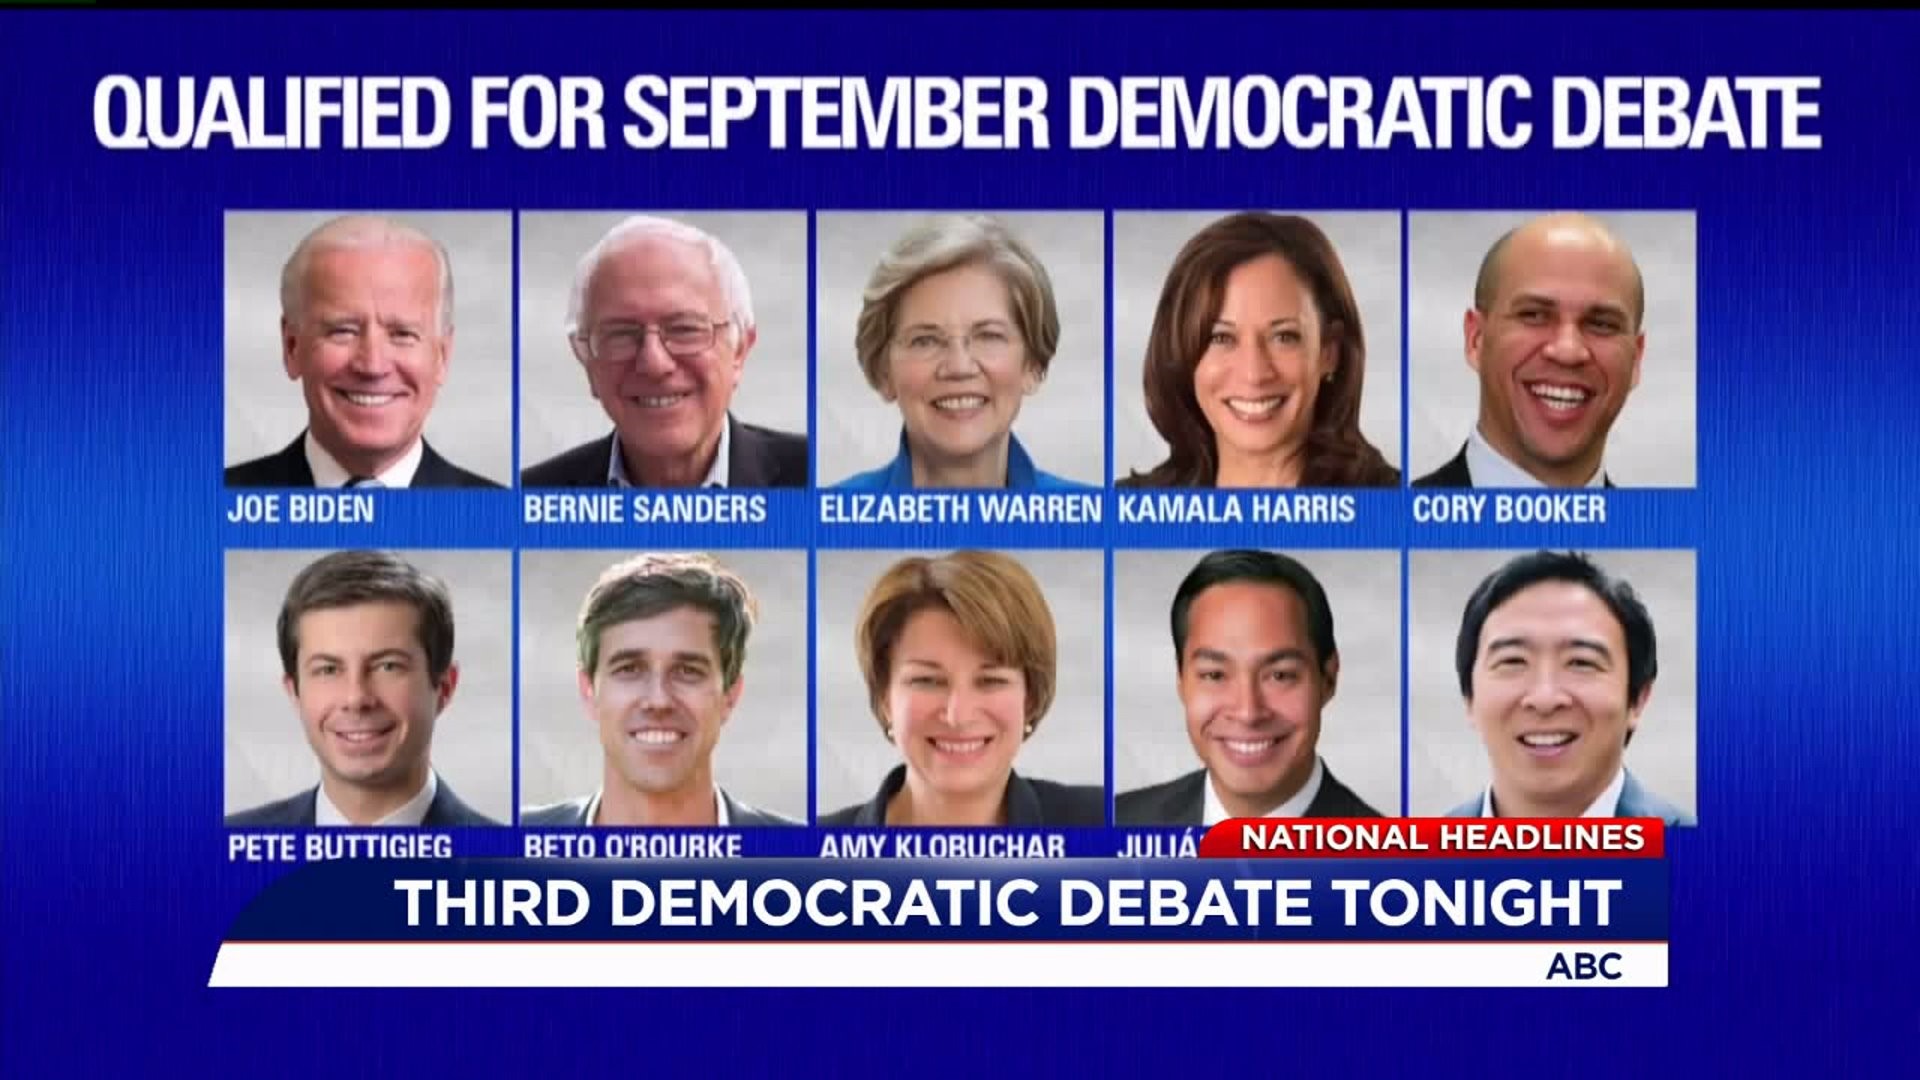 What to expect at the third Democratic debate